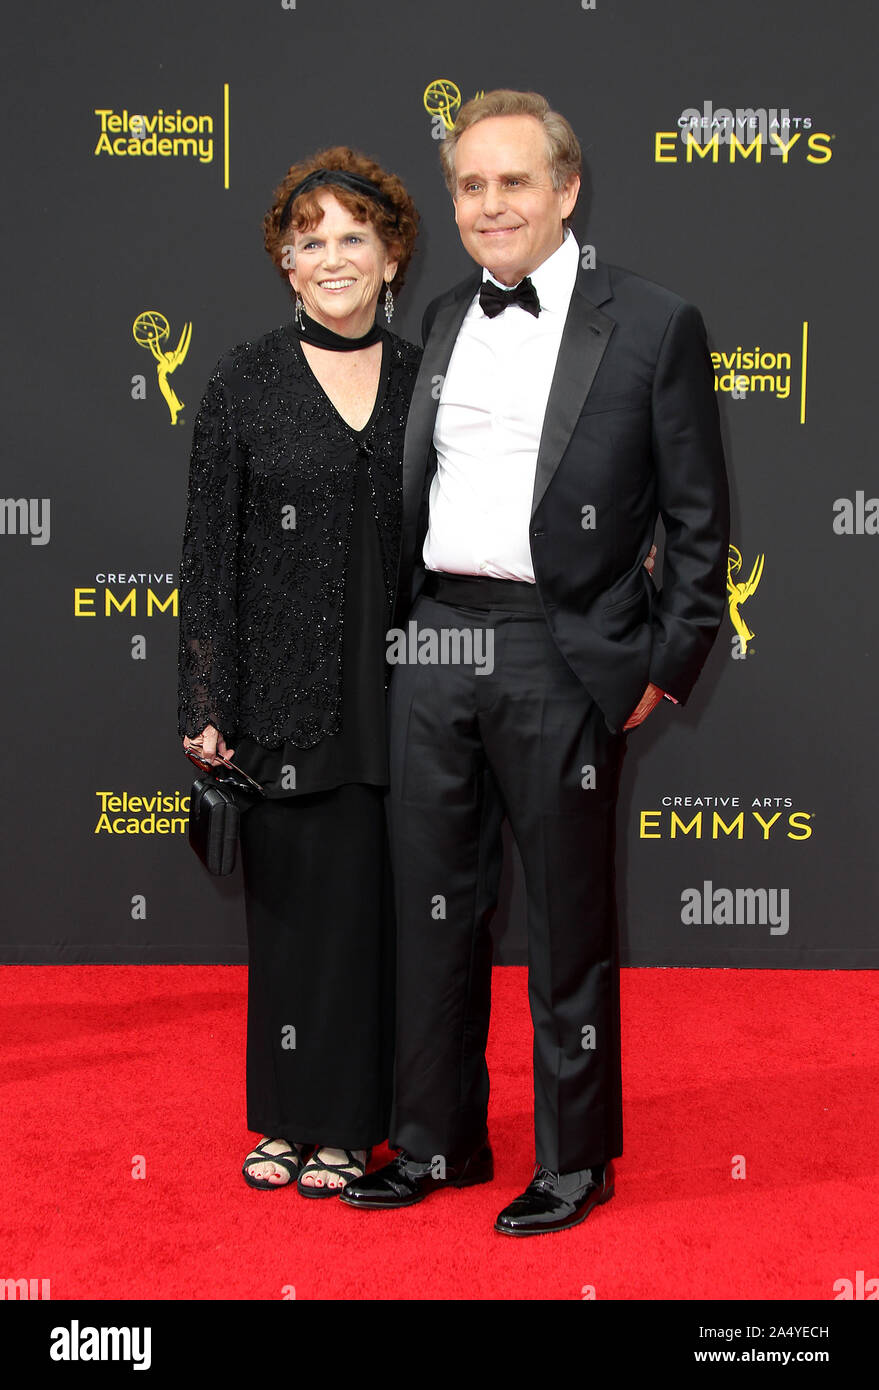 Creative Arts Emmy 2019 - Day 2 Arrivals held at the Microsoft Theatre in Los Angeles, California. Featuring: Peter MacNicol, Martha Cumming Where: Los Angeles, California, United States When: 16 Sep 2019 Credit: Adriana M. Barraza/WENN.com Stock Photo